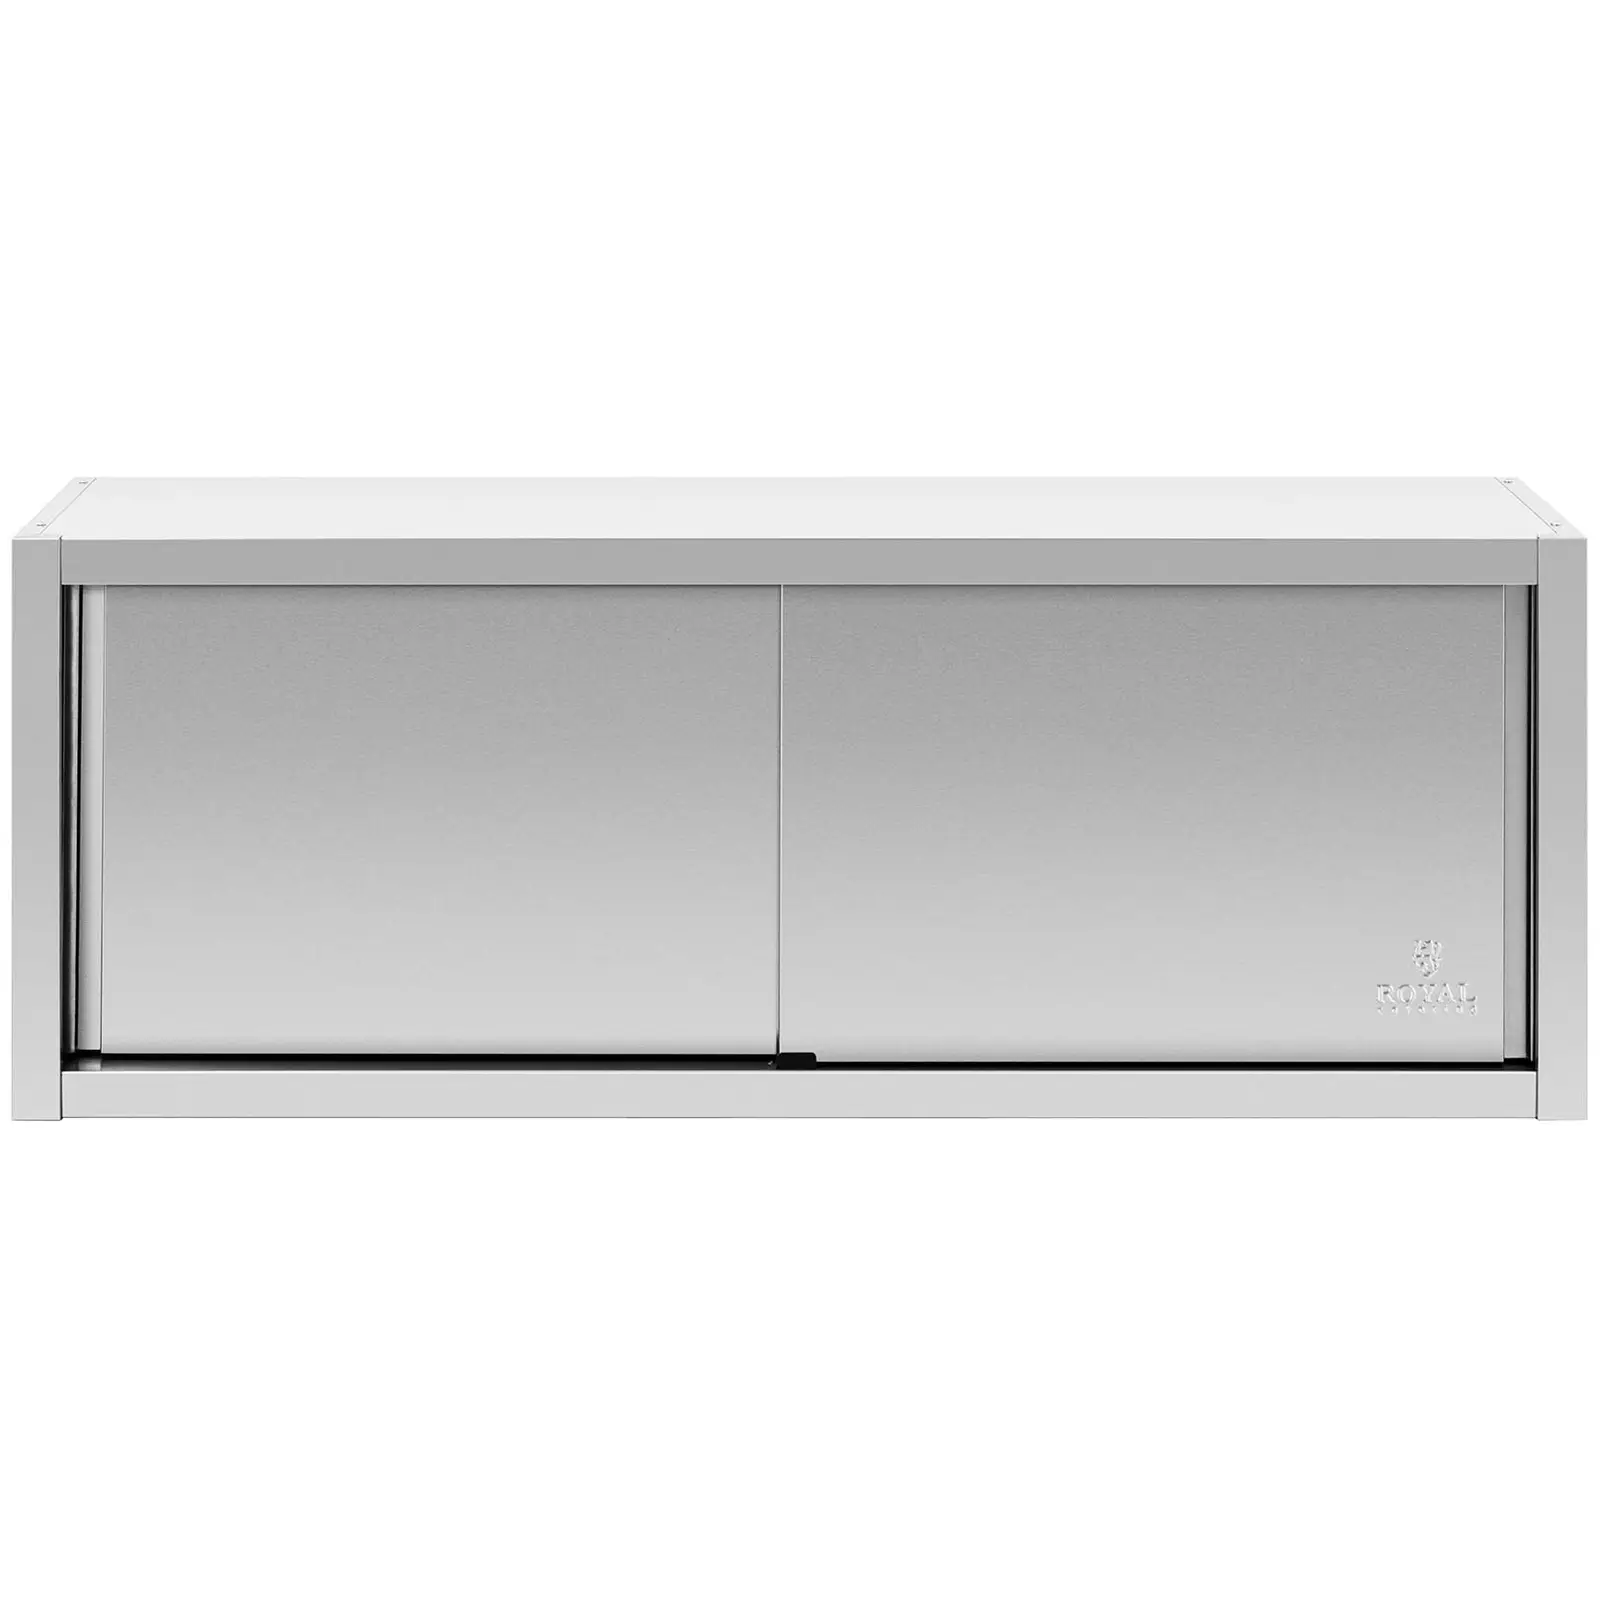 Stainless Steel Hanging Cabinet - 160 x 45 cm